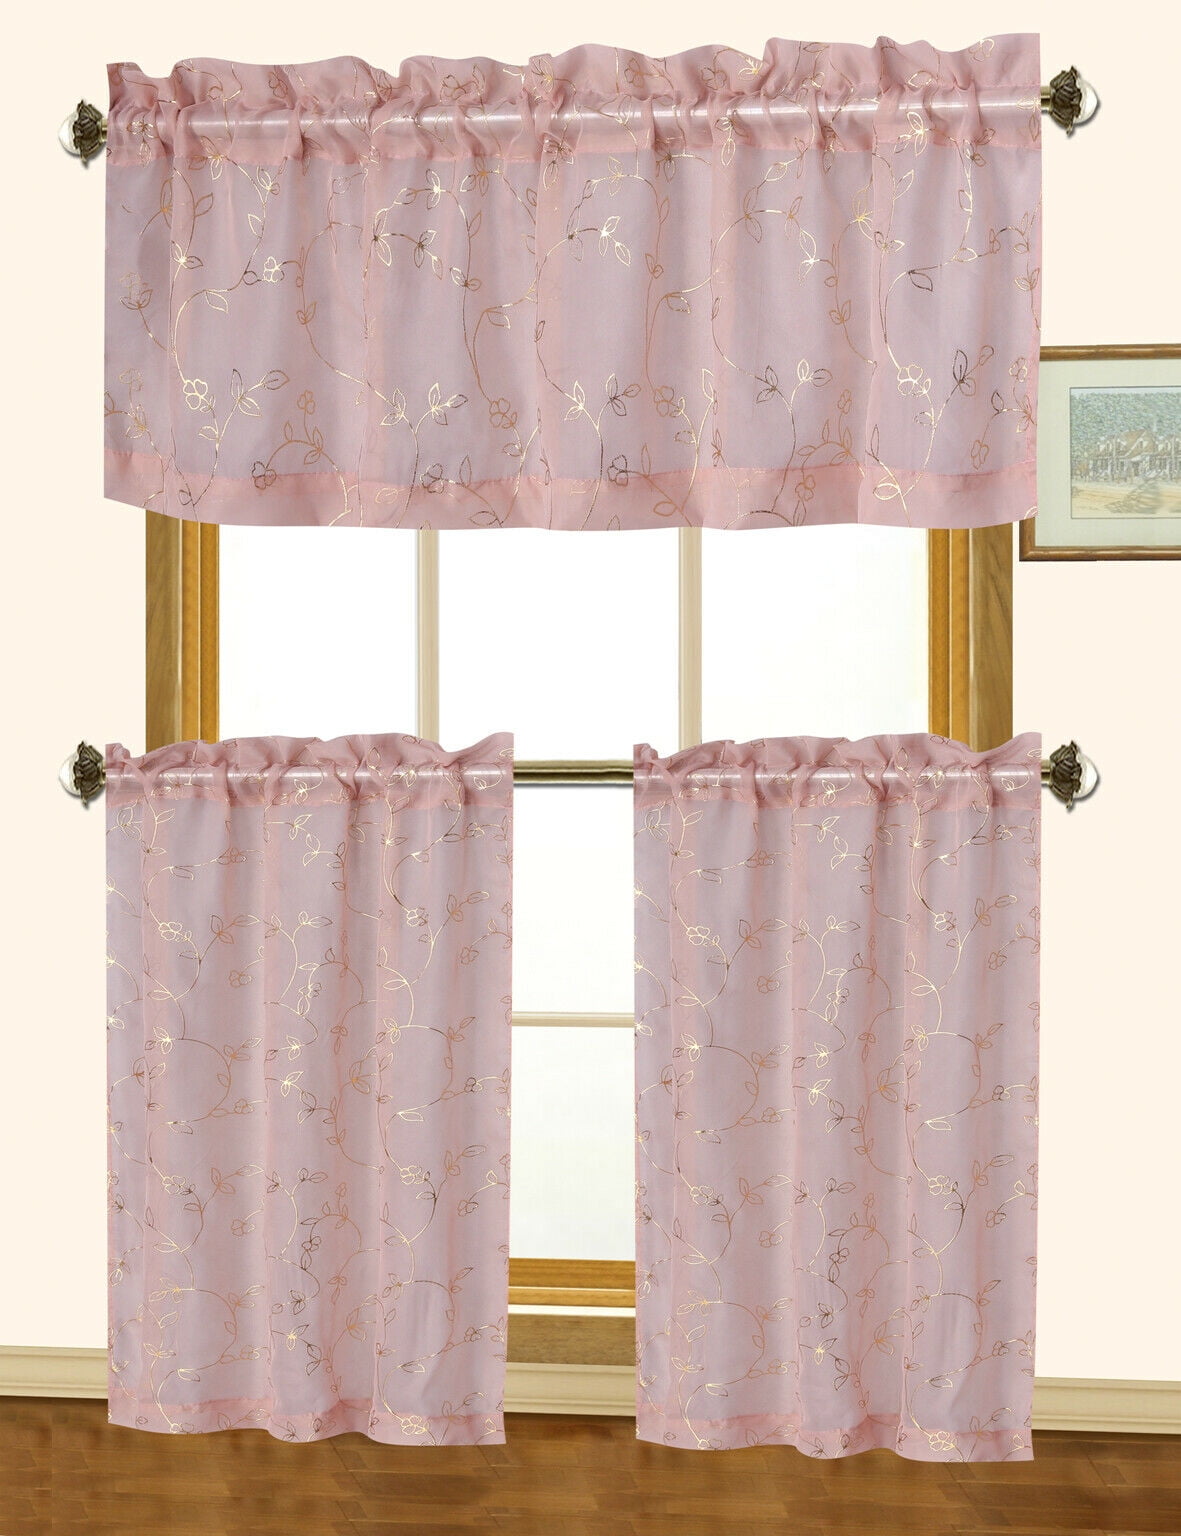 & Valance 3 pc BRIGHT LEAVES 27"x36" 54"x15" Printed Curtains Set: 2 Tiers